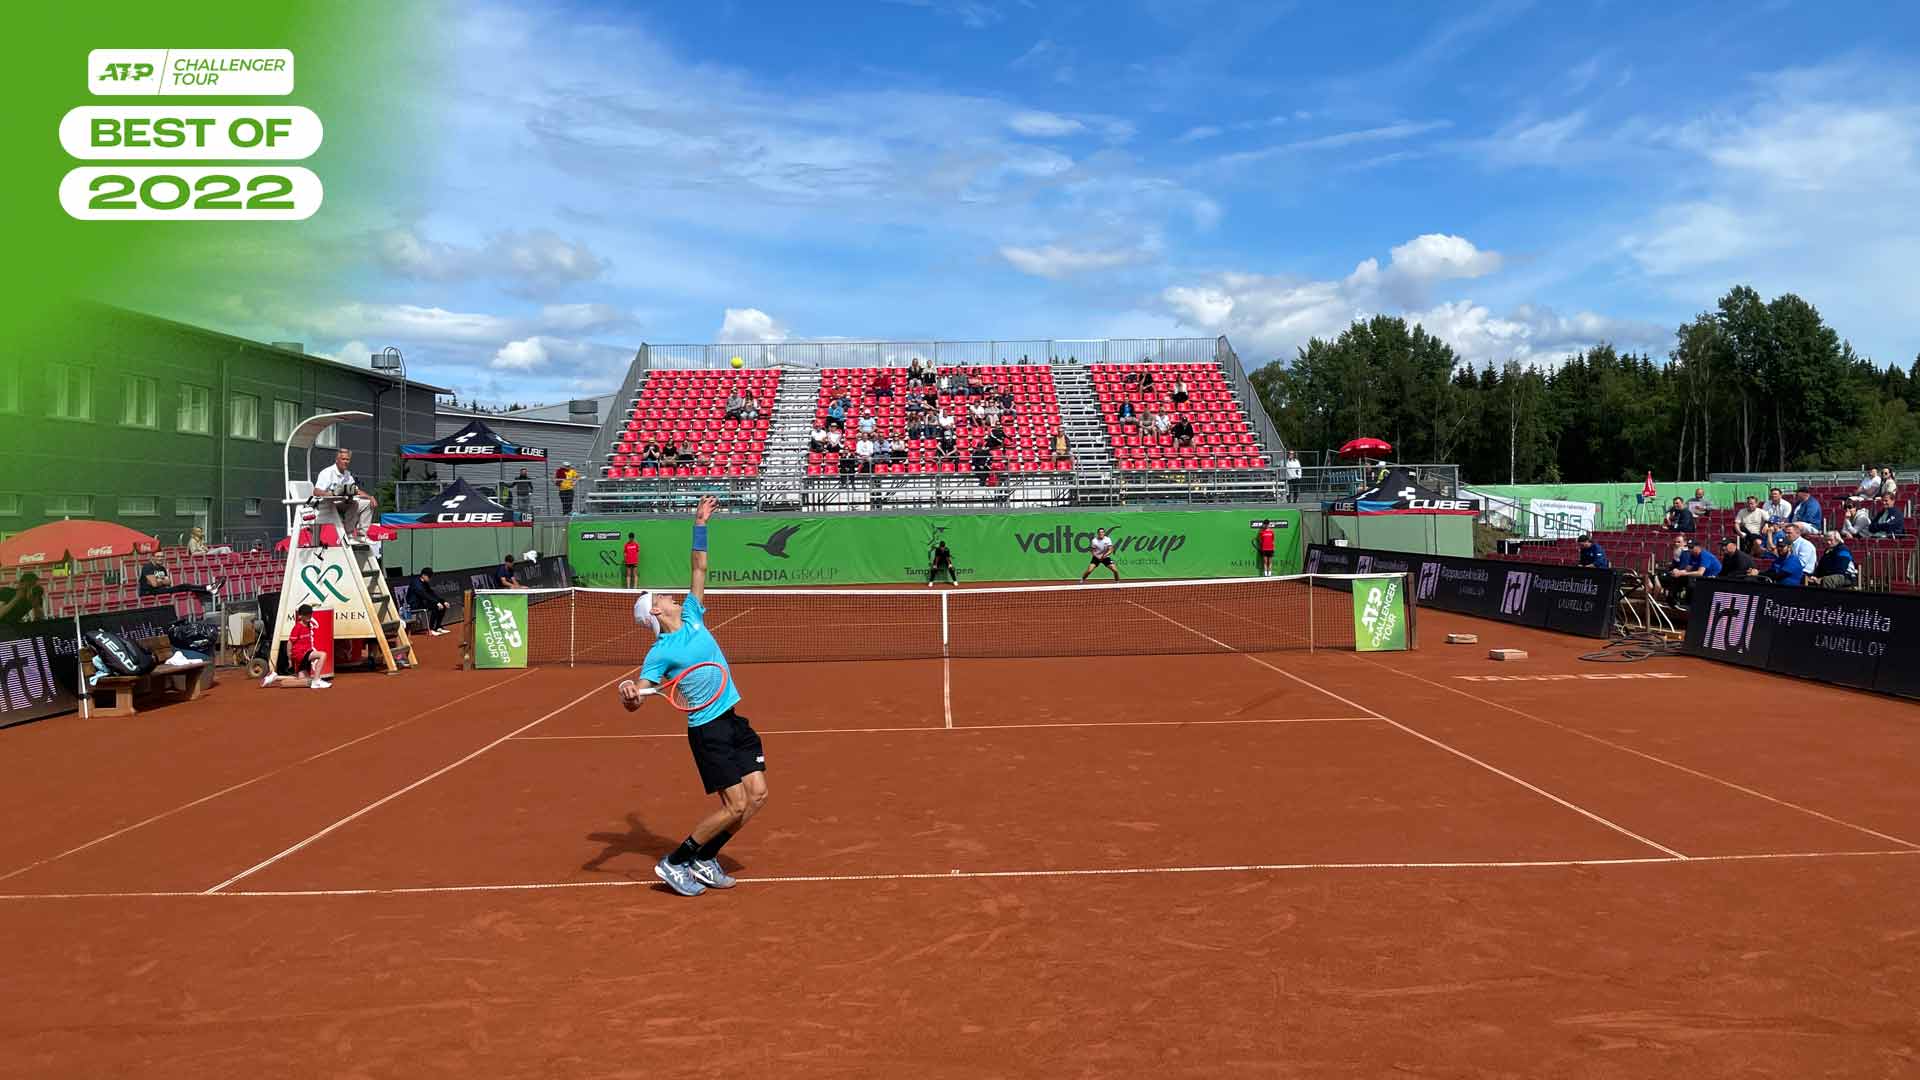 Water Covers 71 Of Earth; ATP Challenger Tour Covers The Relaxation